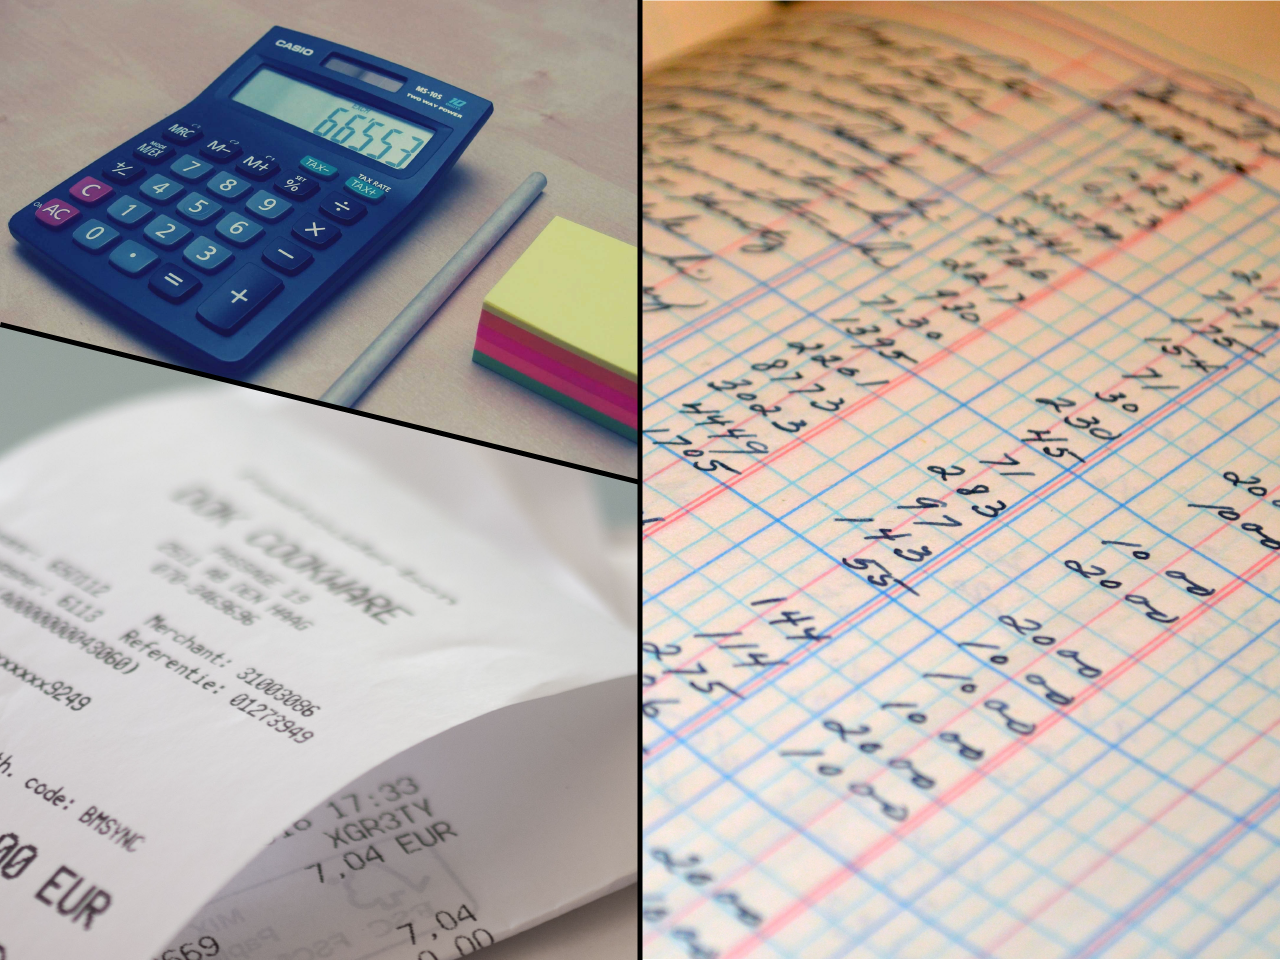 A collage of three images, separated by black lines. In the top left is a calculator on a desk, next to the calculator is a grey pencil and a wad of sticky notes. The picture underneath the calculator is a picture of a receipt. Taking up the full height, and half of the width is the last picture - this is a picture of a manual ledger.